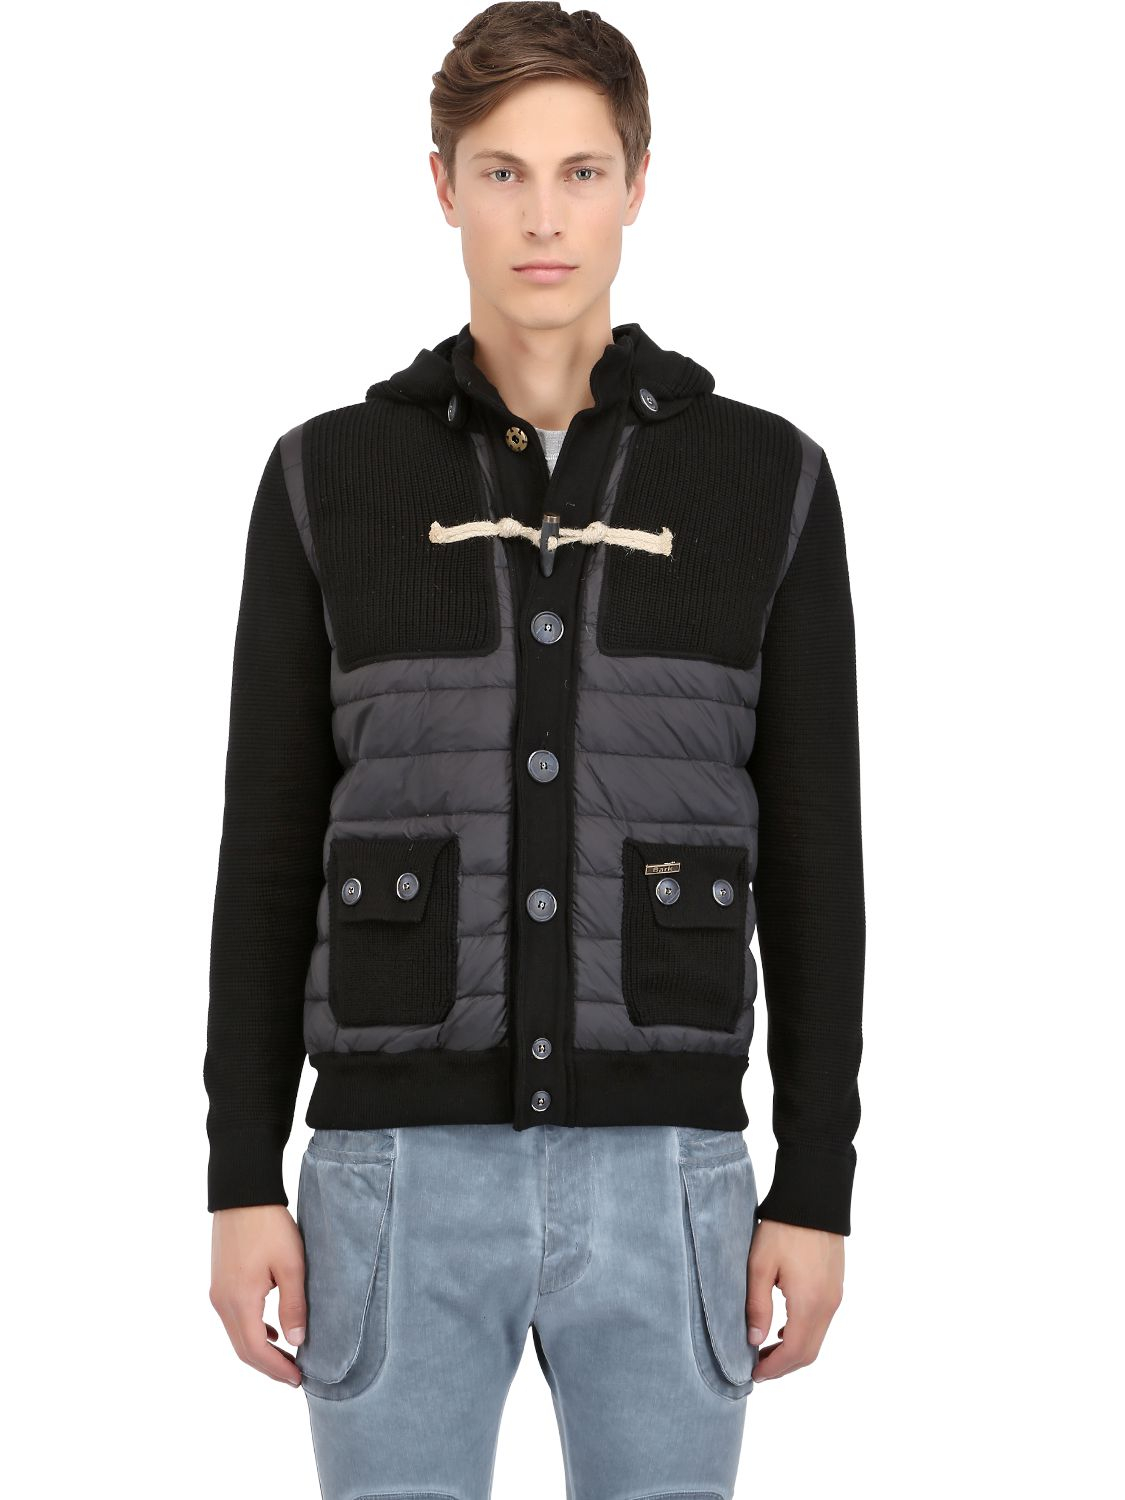 Lyst - Bark Cotton Tricot Quilted Nylon Jacket in Black for Men